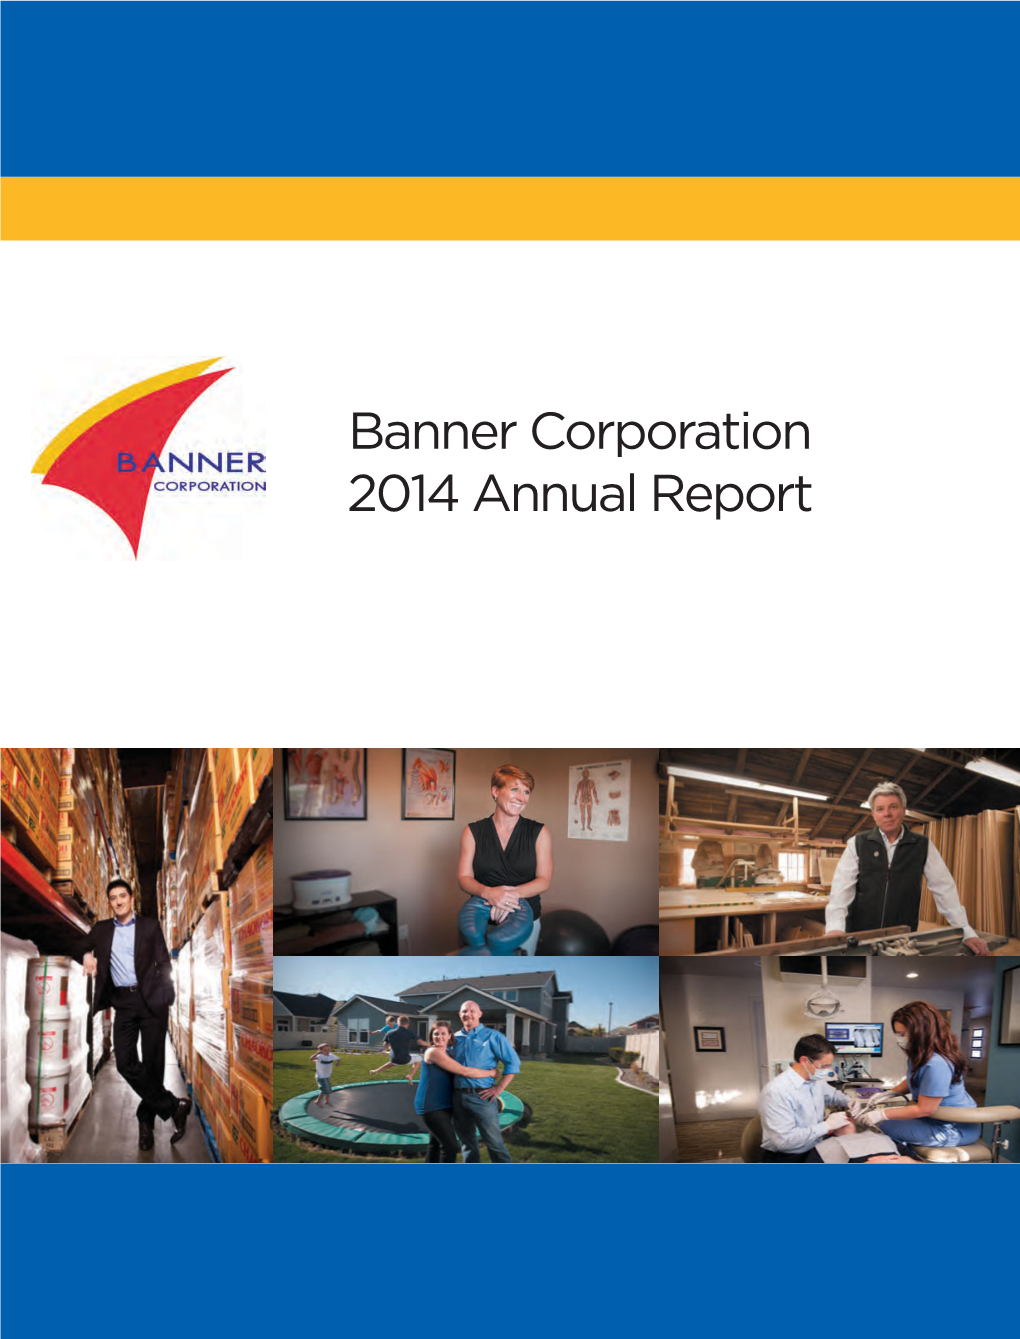 Banner Corporation 2014 Annual Report Fellow Shareholders, and Strong Earnings Momentum While • 1.17% Return on Average Assets, Maintaining a Moderate Risk Proﬁle